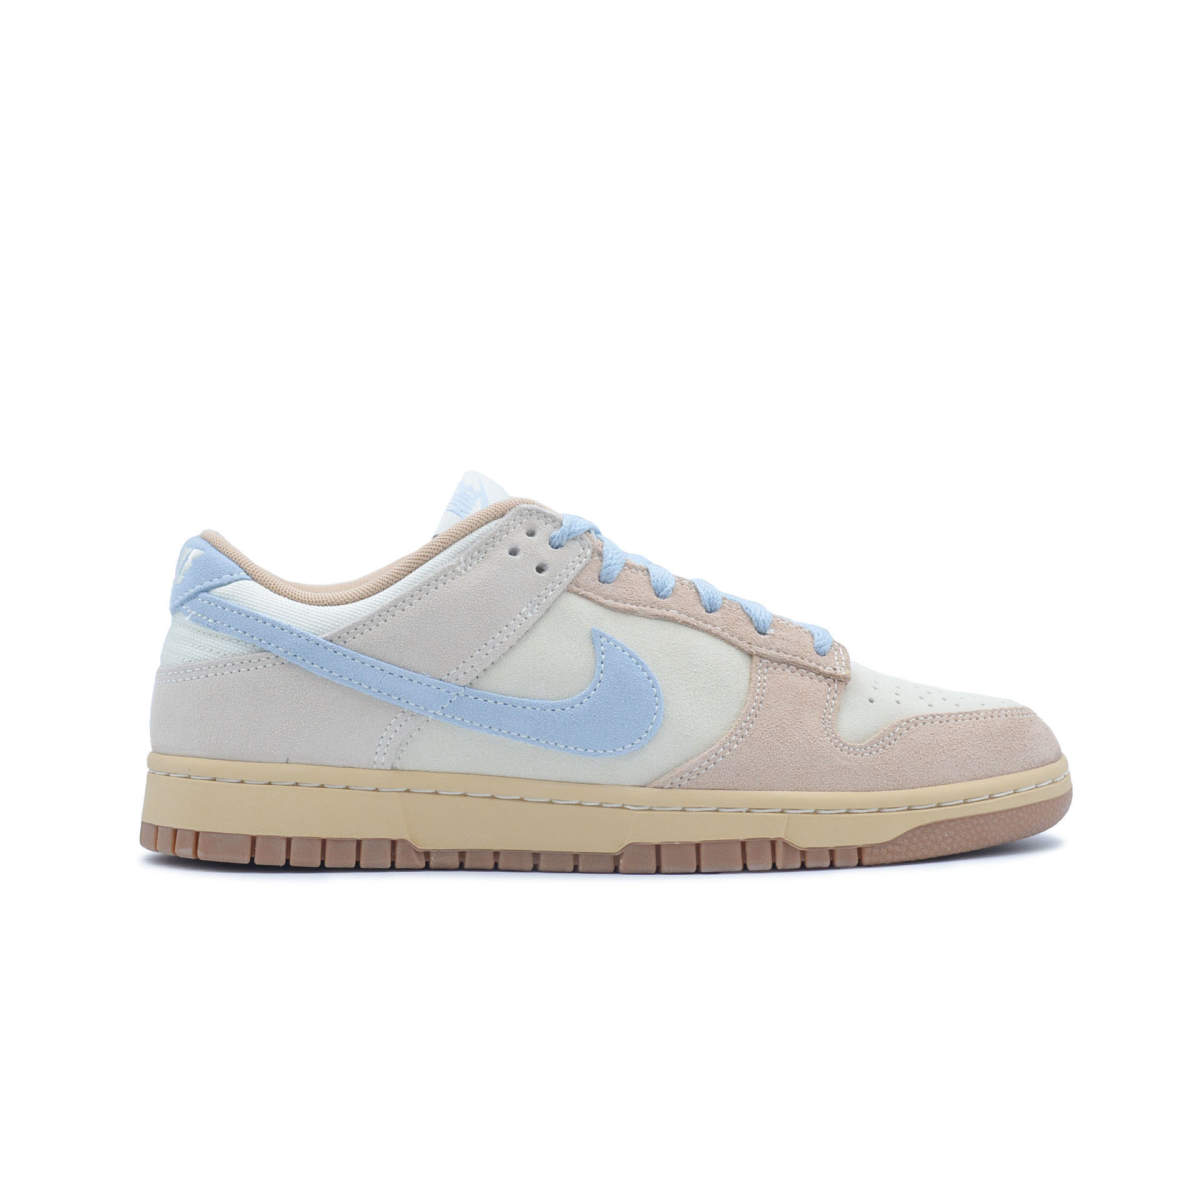 Dunk low light armory blue